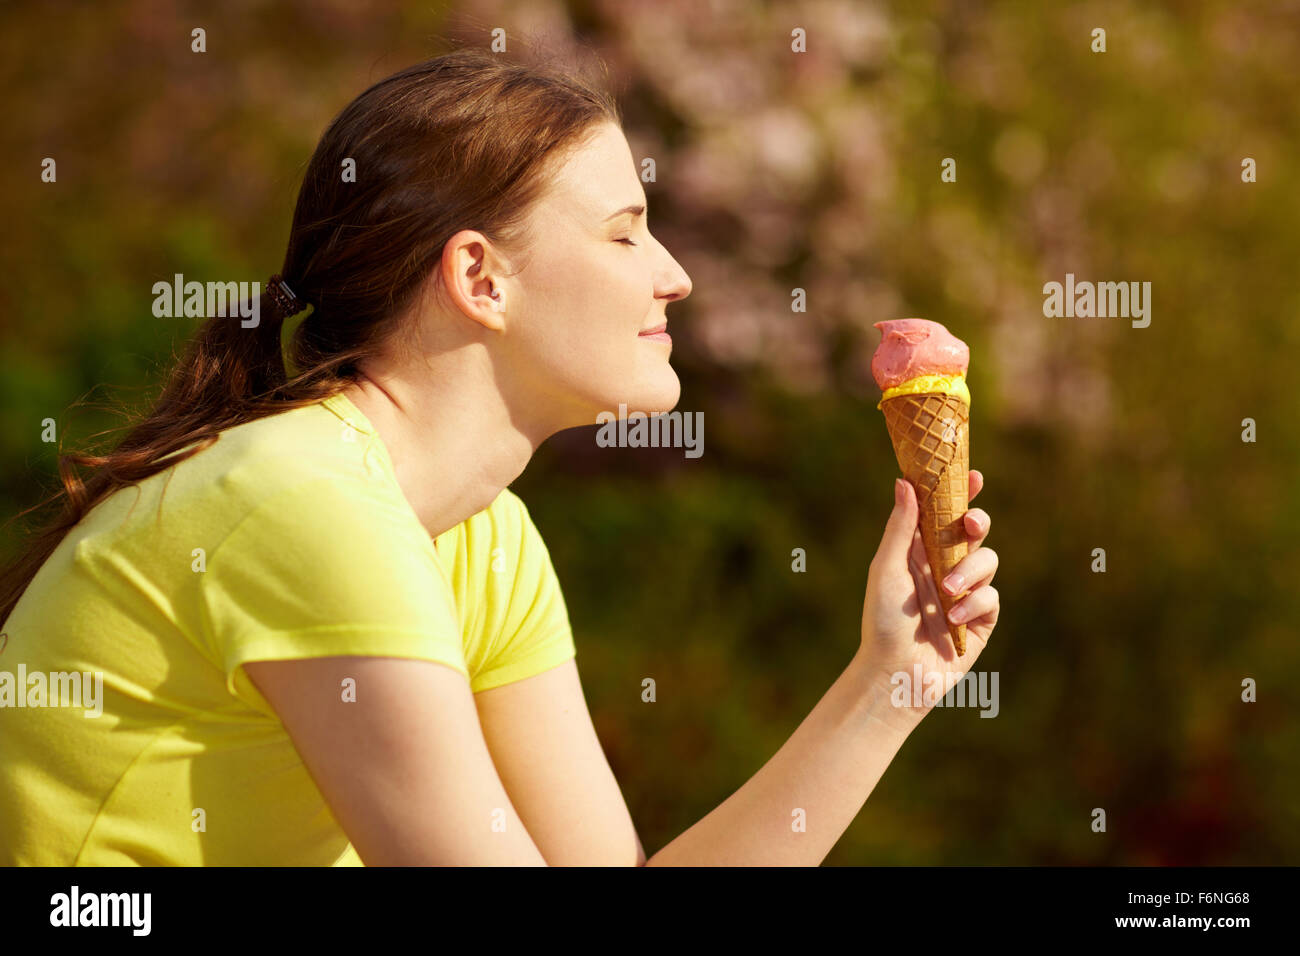 Happy woman eating an ice cream cone in summer Stock Photo